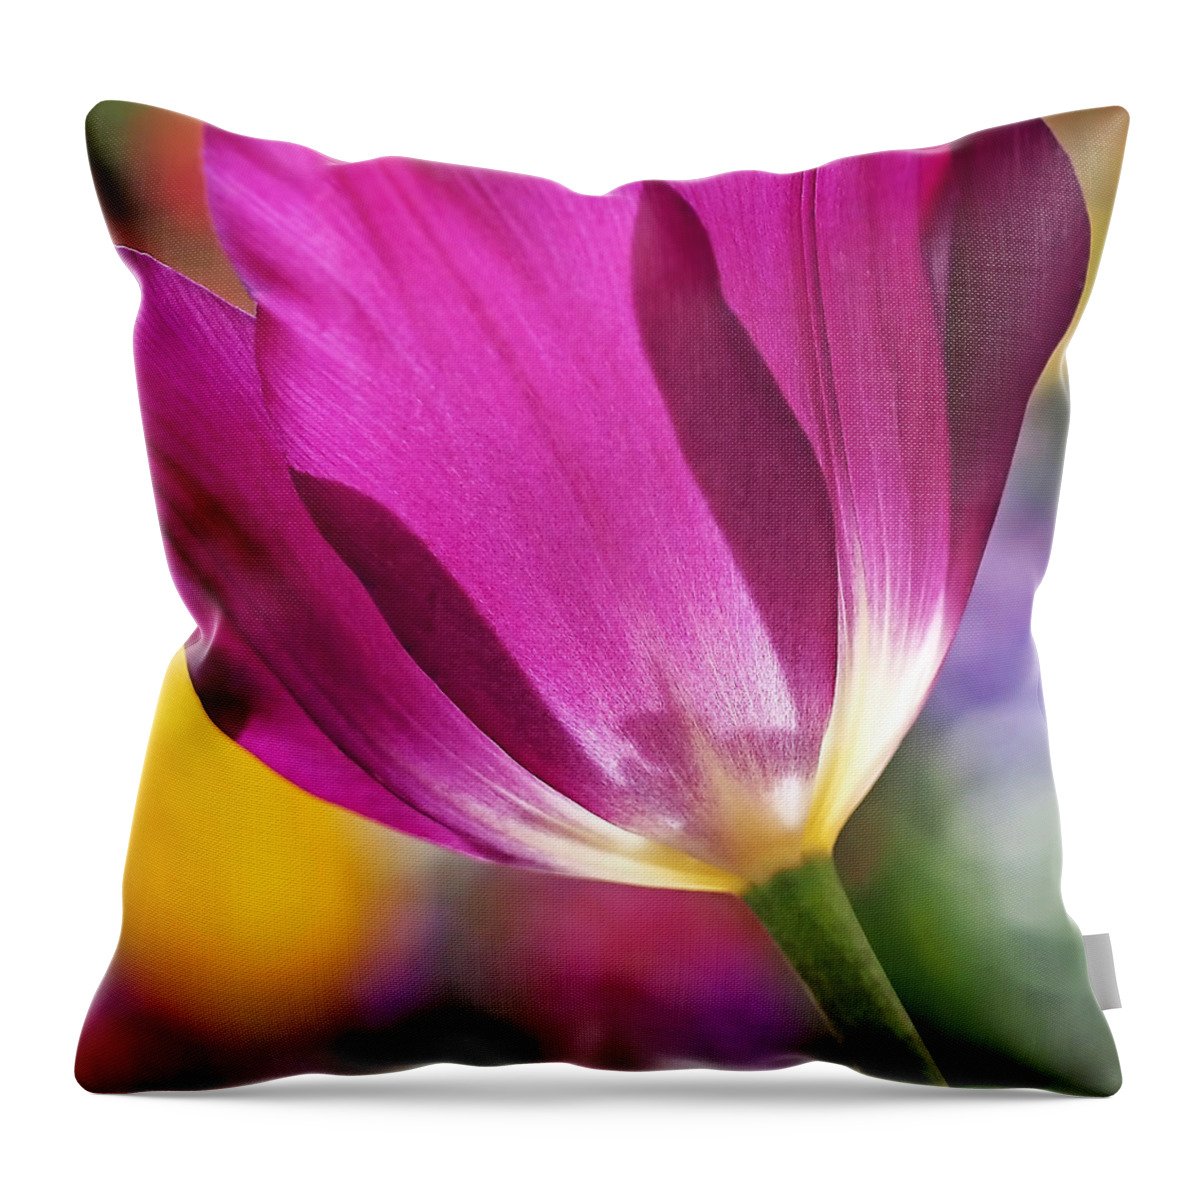 Tulip Throw Pillow featuring the photograph Spring Tulip - Square by Rona Black